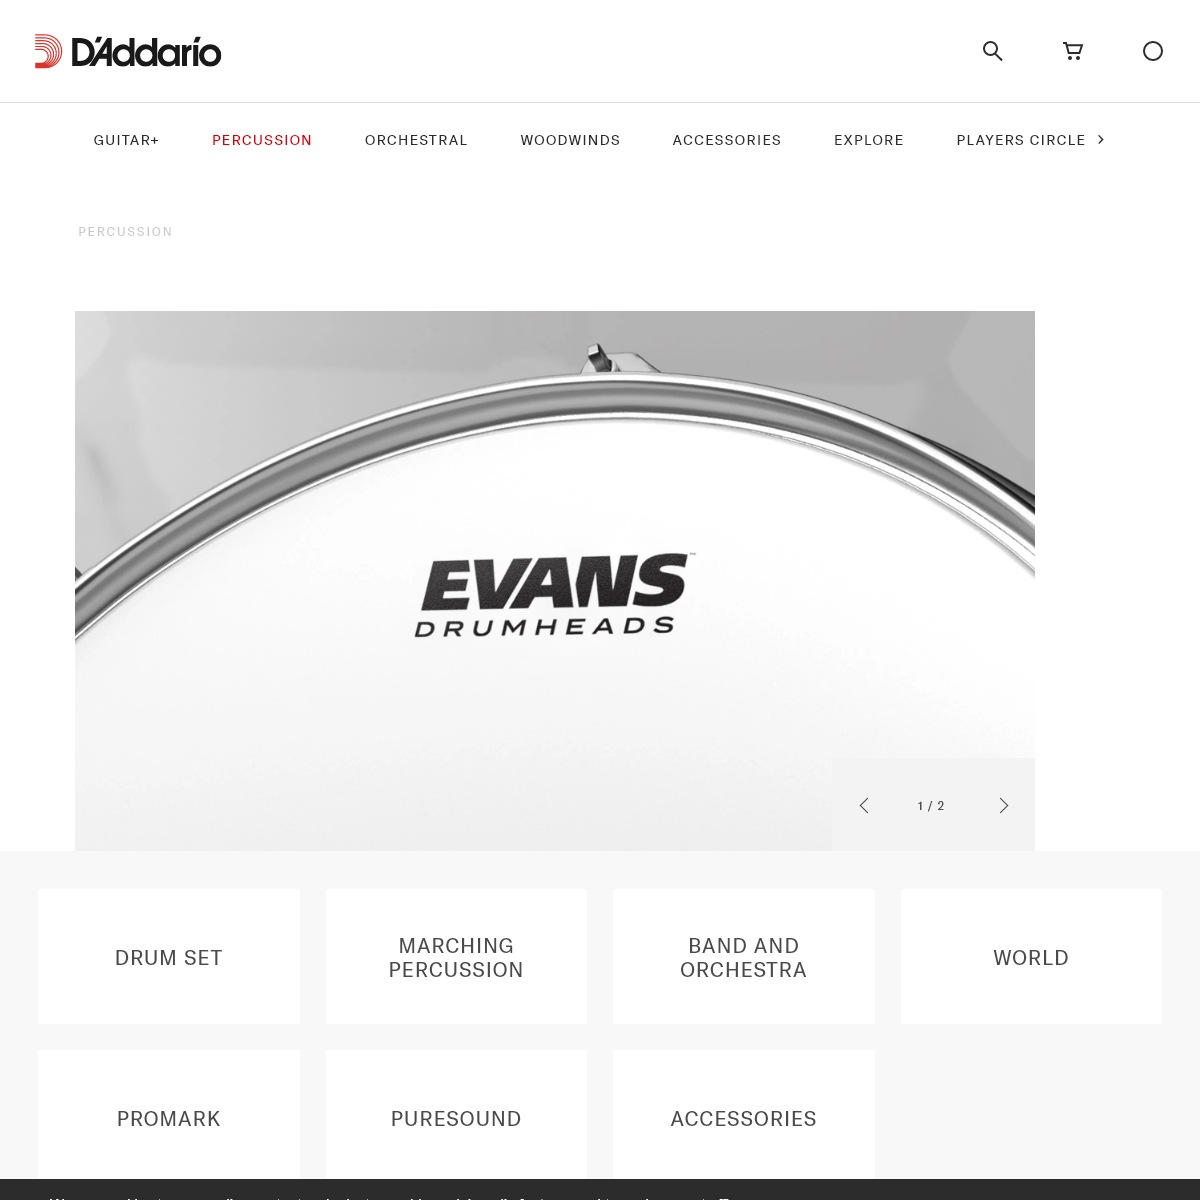 A complete backup of evansdrumheads.com